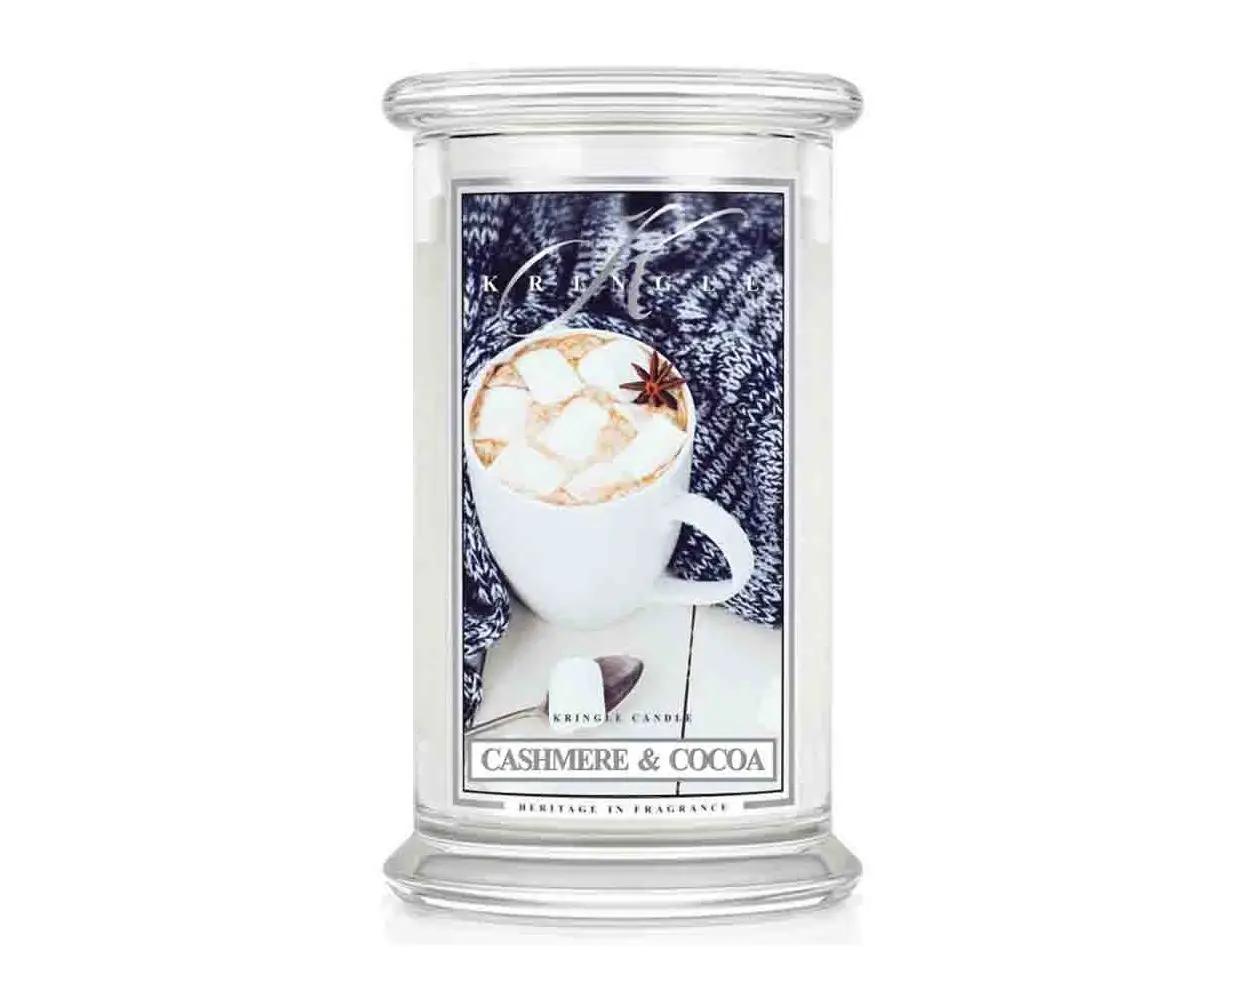 Gro脽e Classic Candle & Cocoa Cashmere